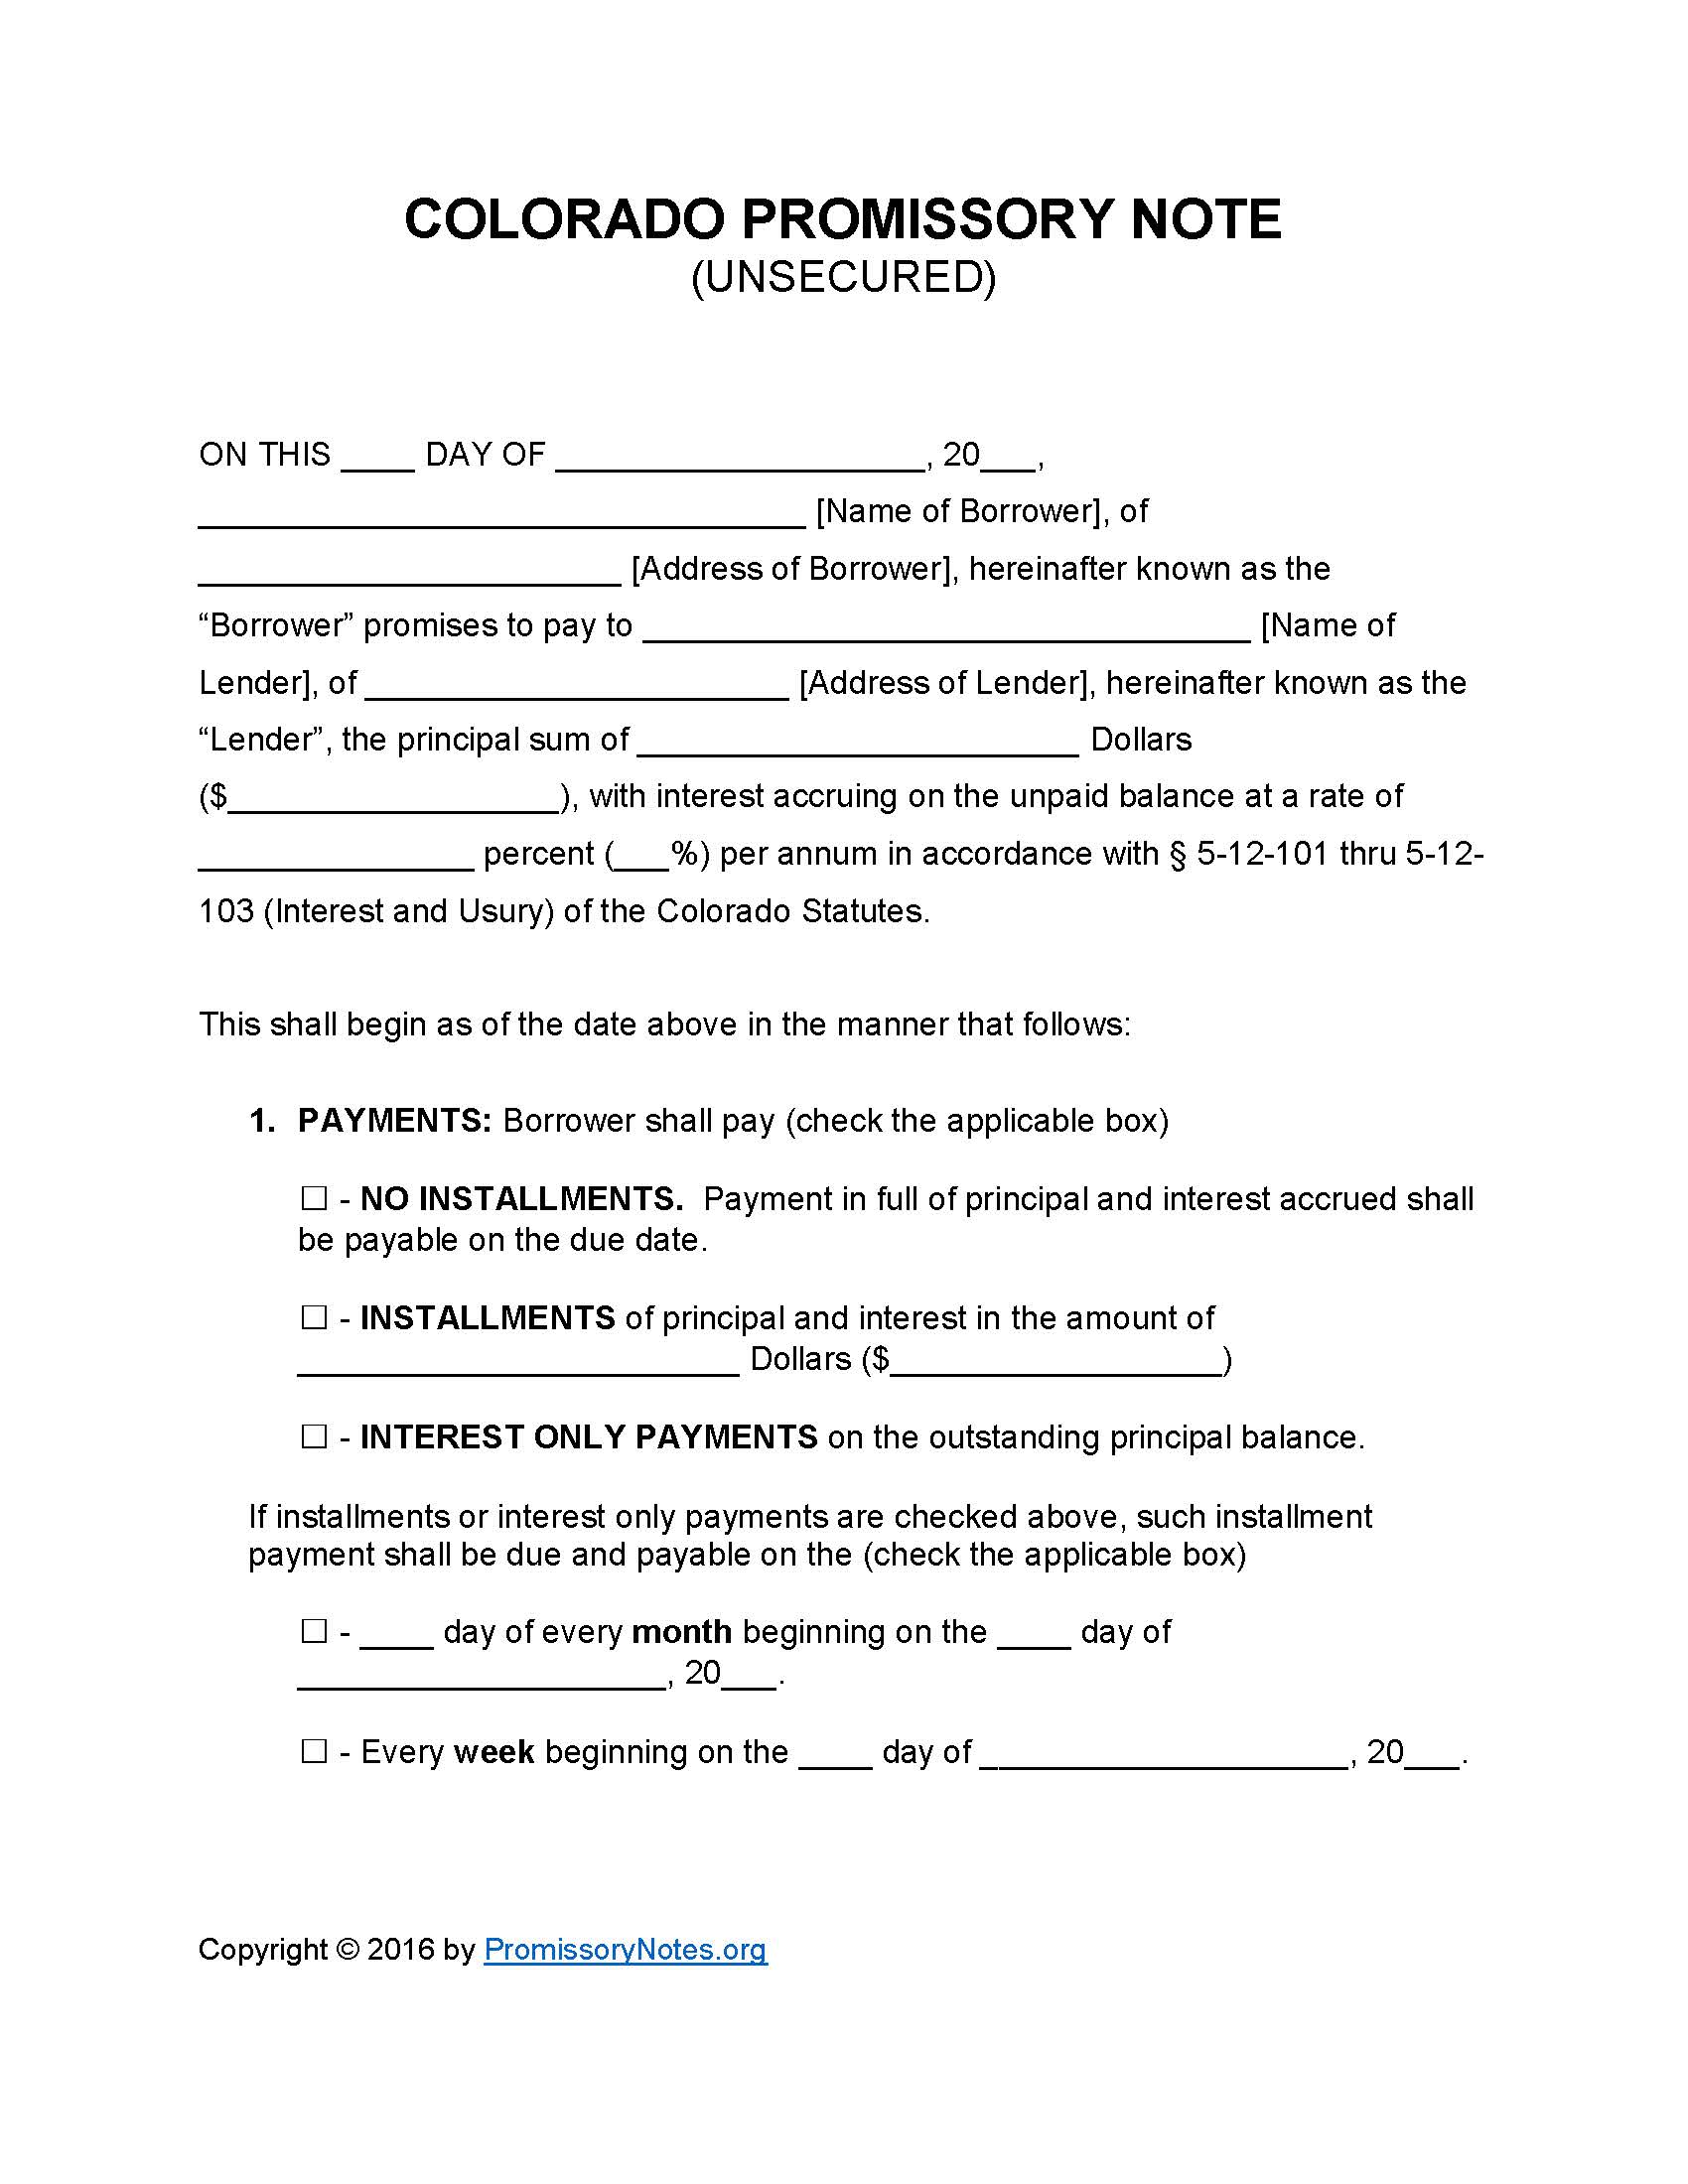 Colorado Unsecured Promissory Note Template - Promissory Notes Intended For Promissory Notes Templates